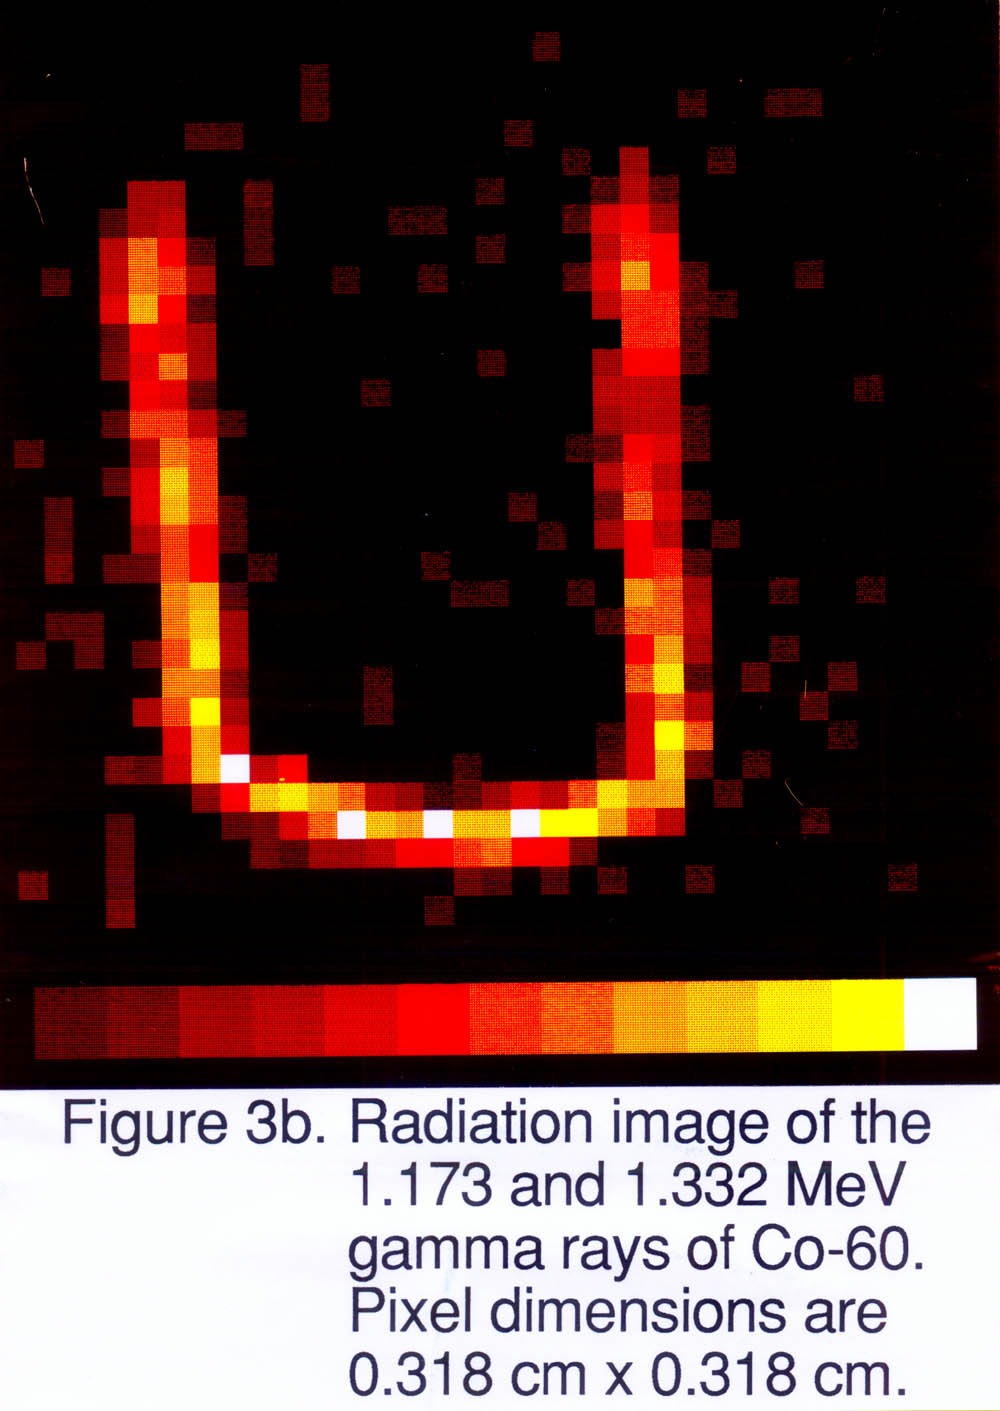 radiation image of the 1.173 and 1.332 MeV gamma rays of Co-60